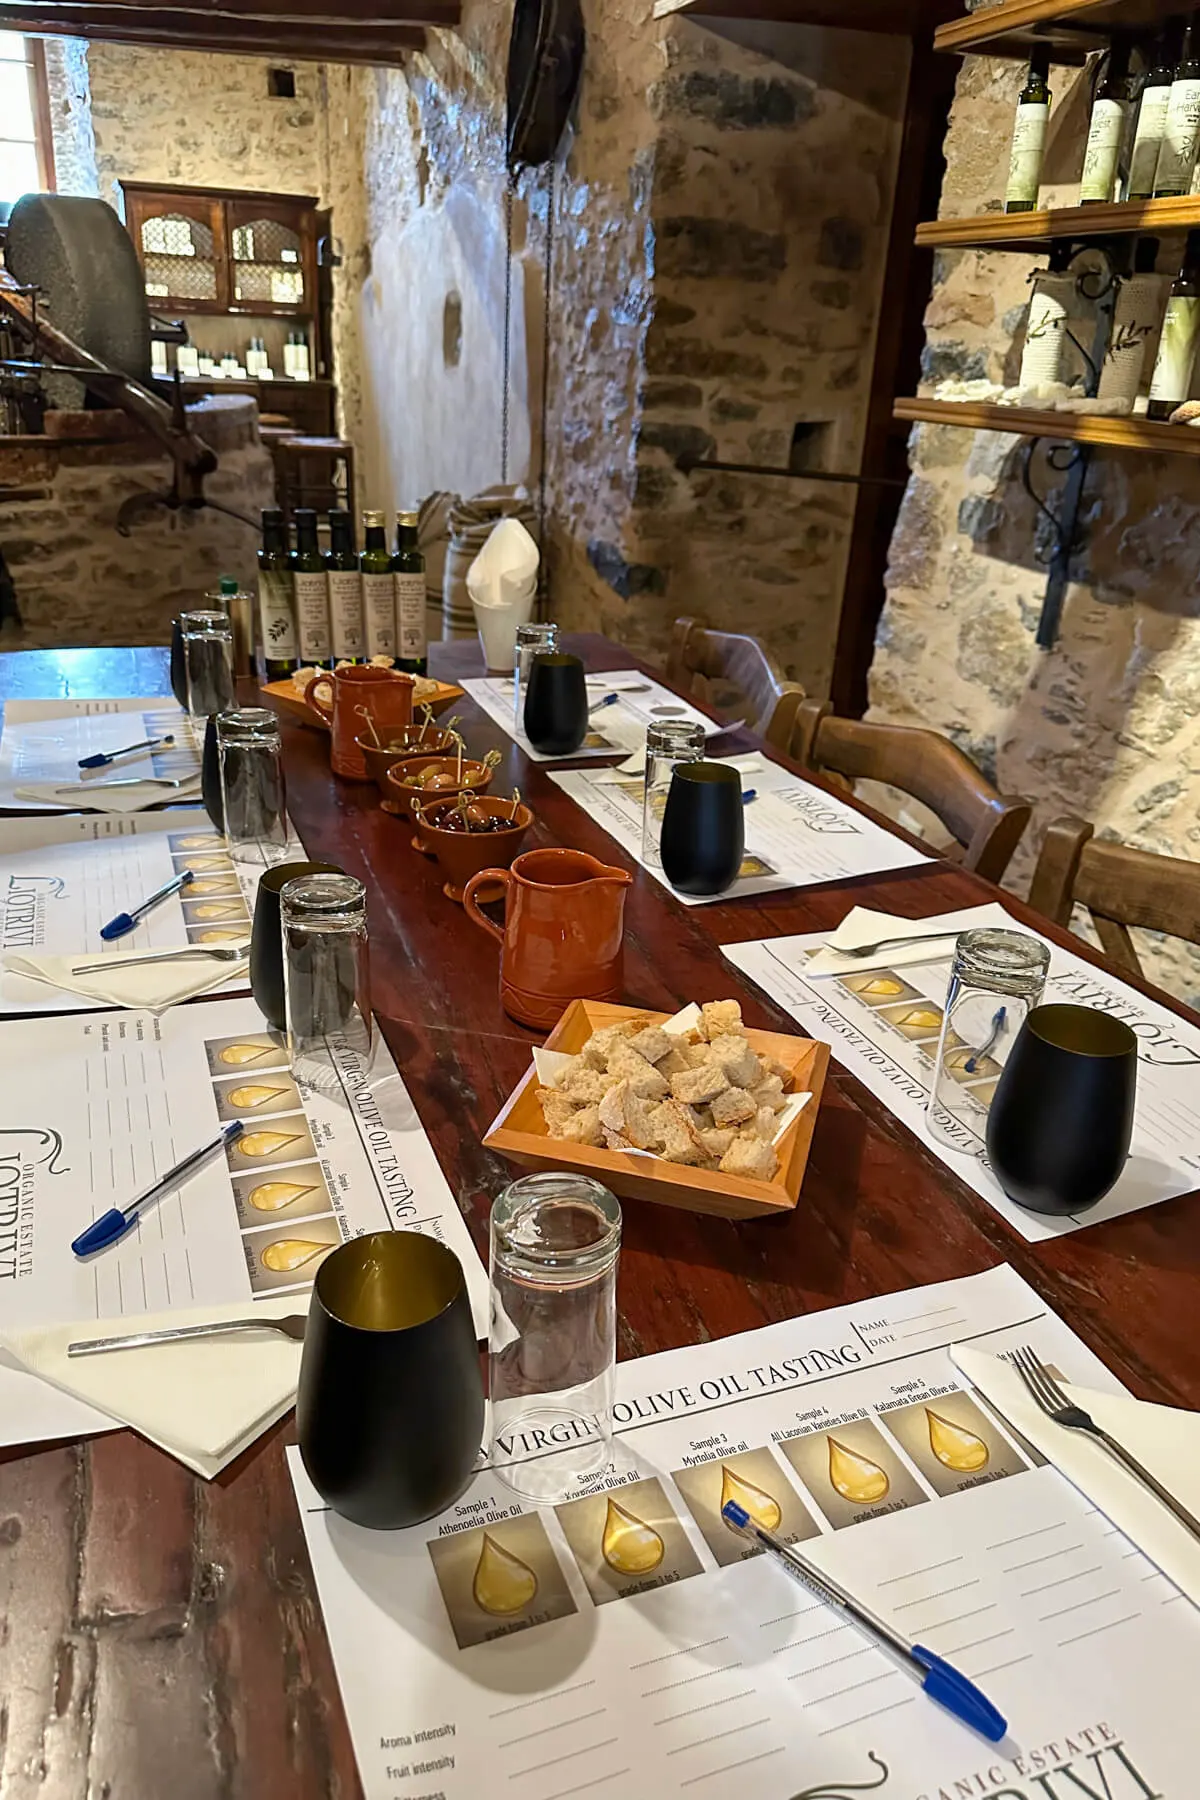 The table at the Liotrivi Estate set for the olive oil tasting